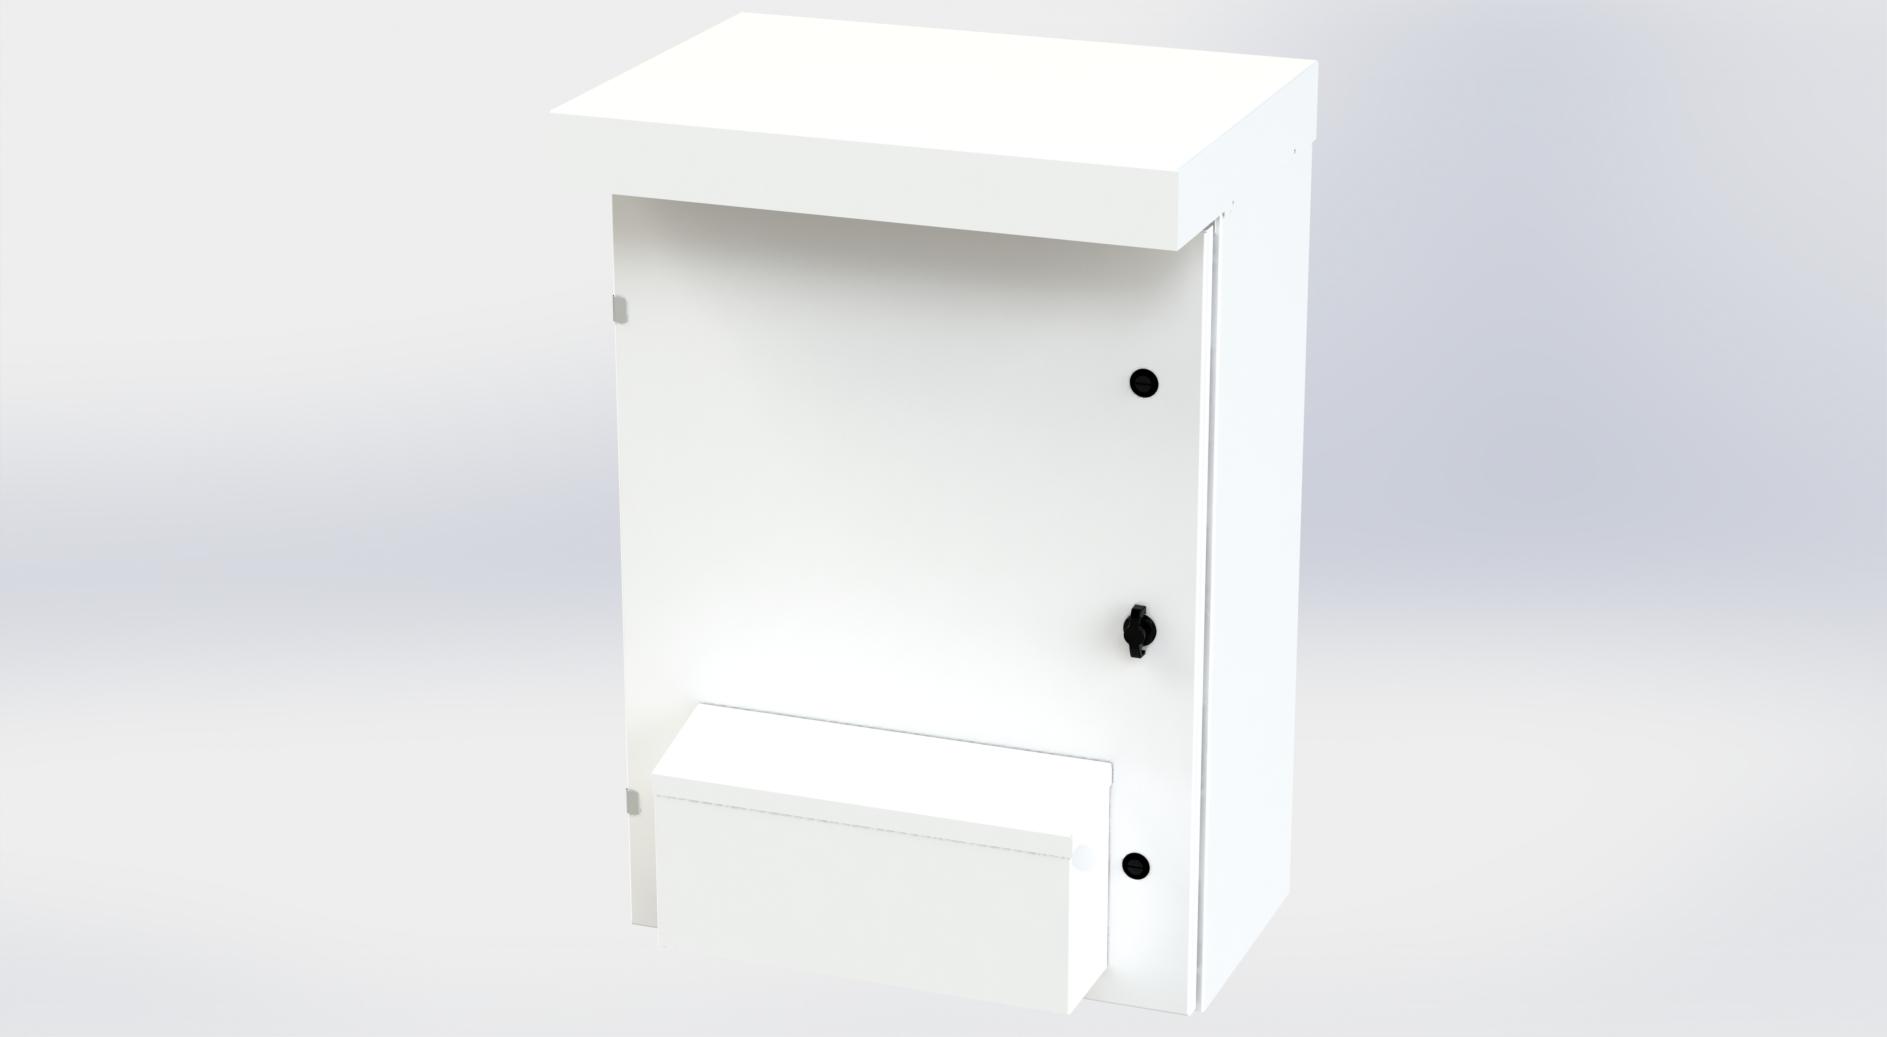 Saginaw Control SCE-35VR2412 Enclosure, Vented Type 3R, Height:35.00", Width:24.00", Depth:12.00", White powder coating inside and out. Optional sub-panels are powder coated white.